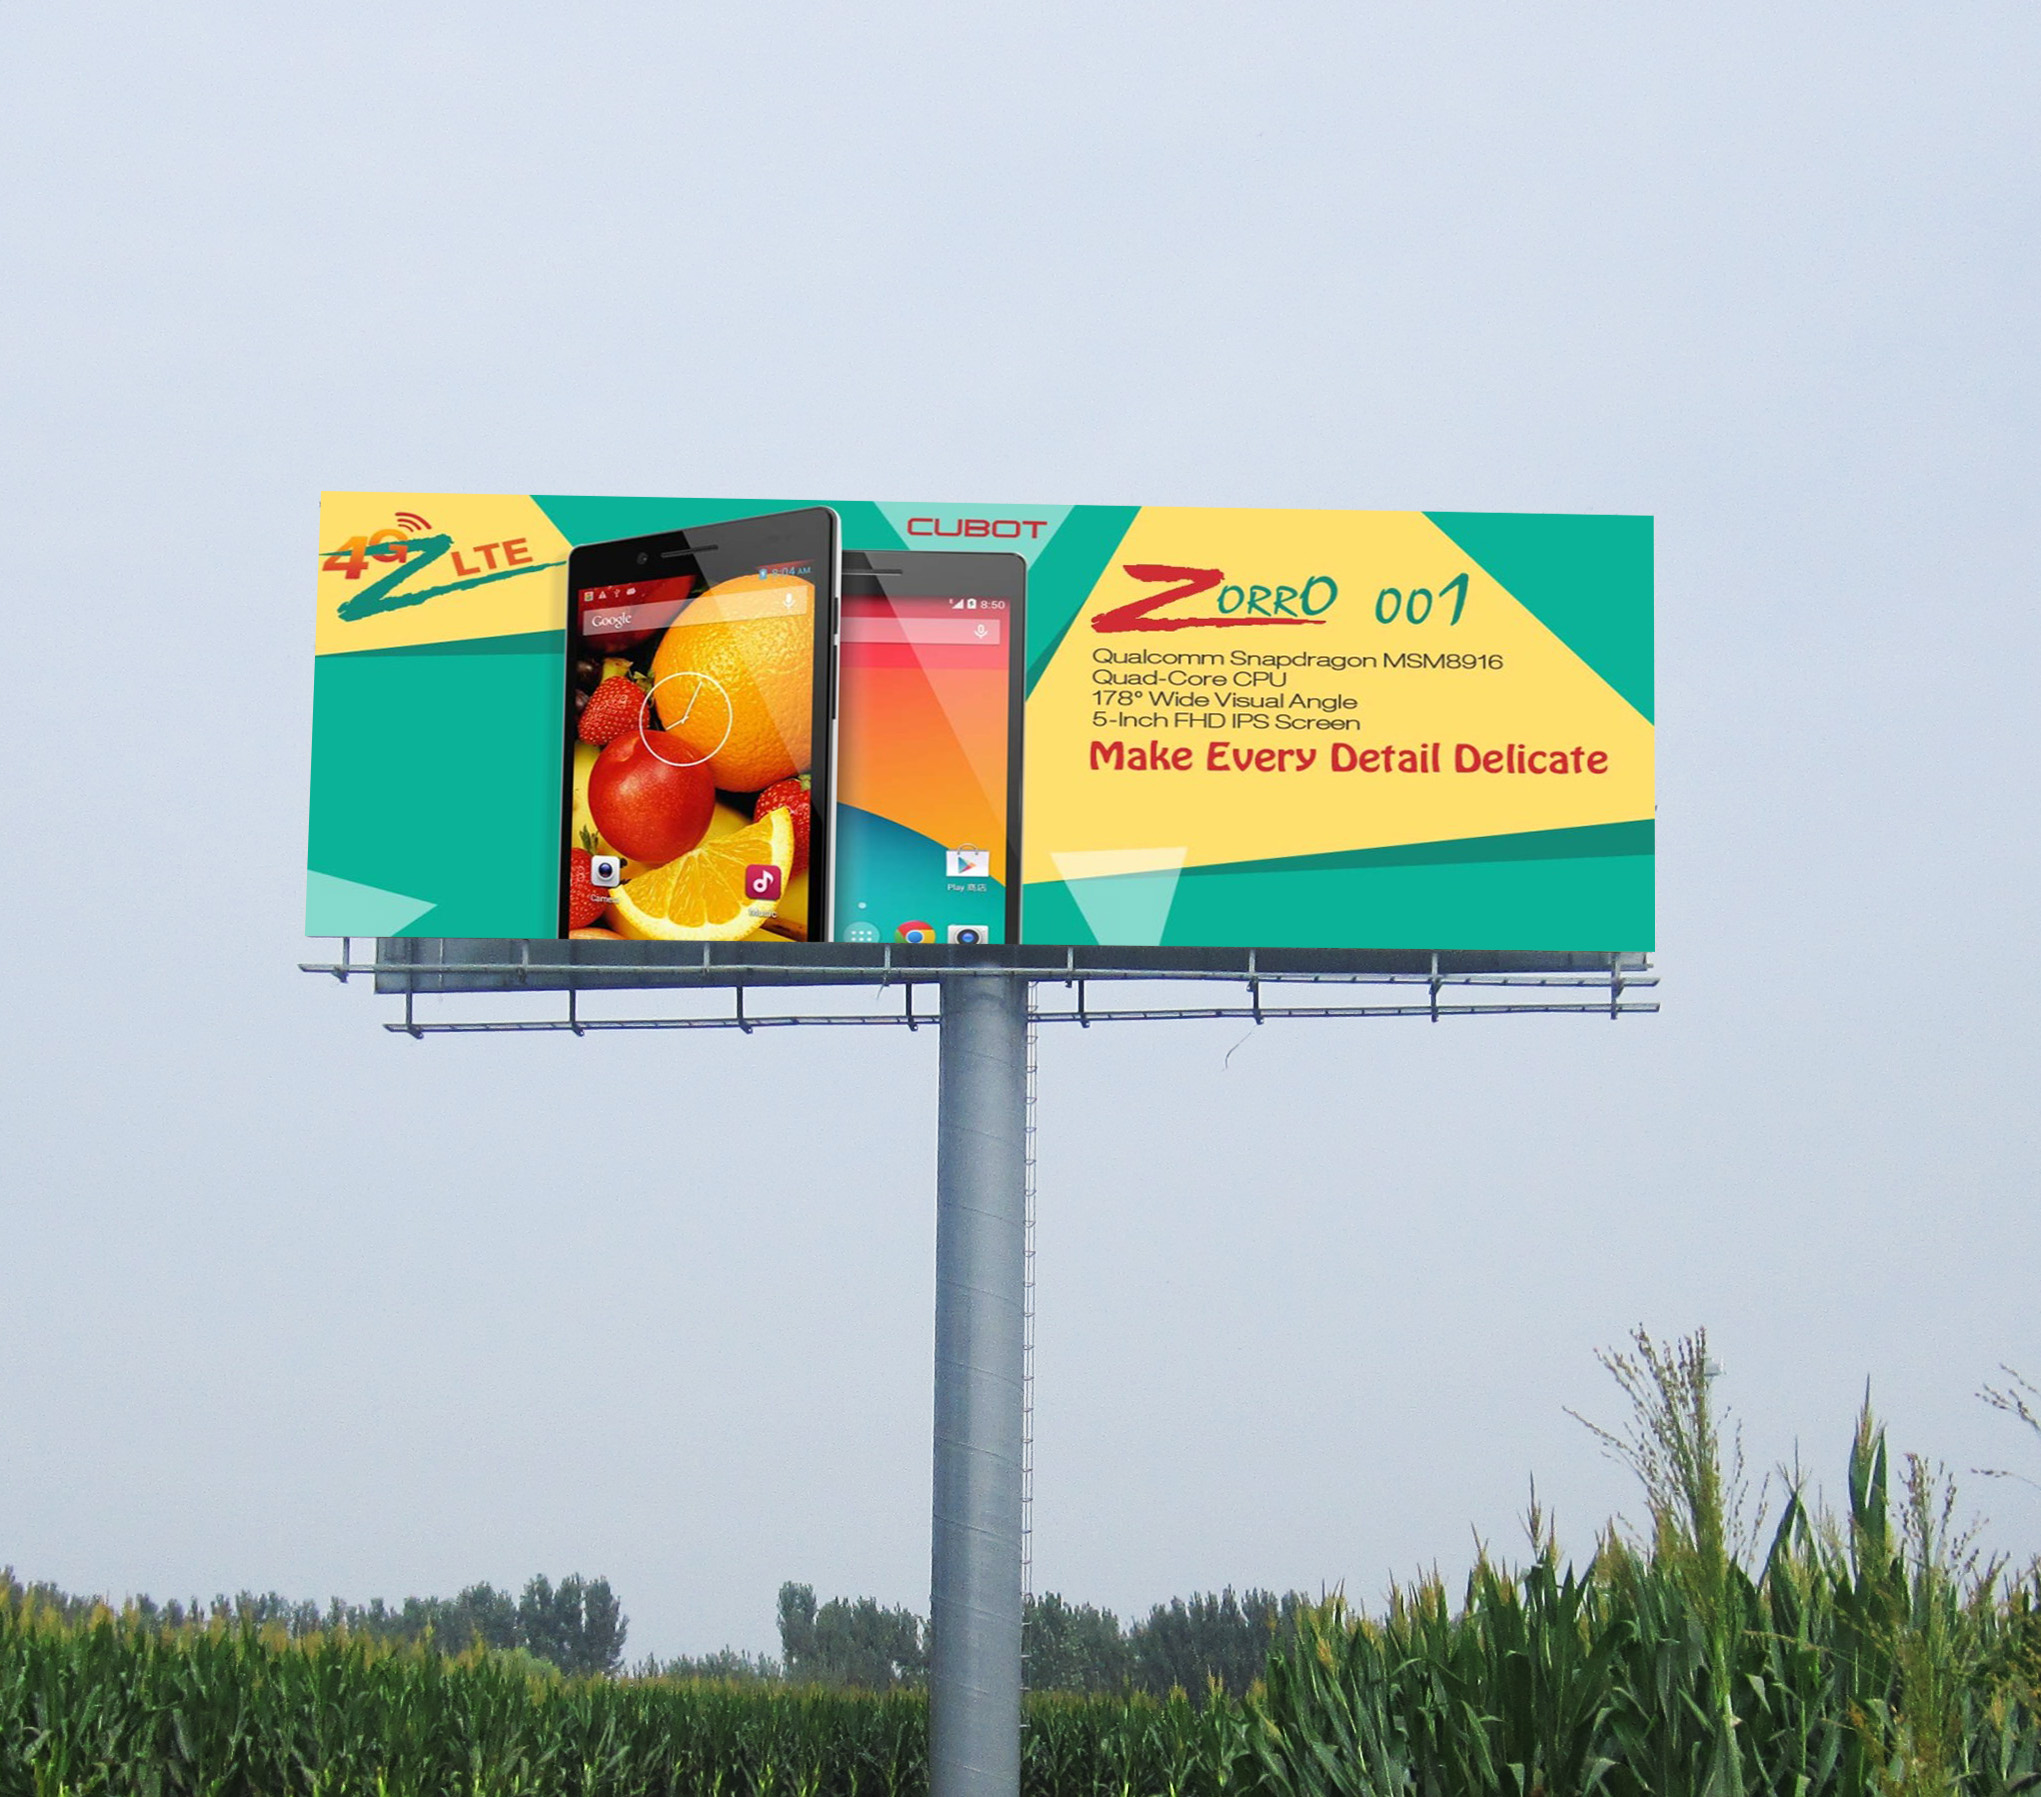 About an outdoor billboard